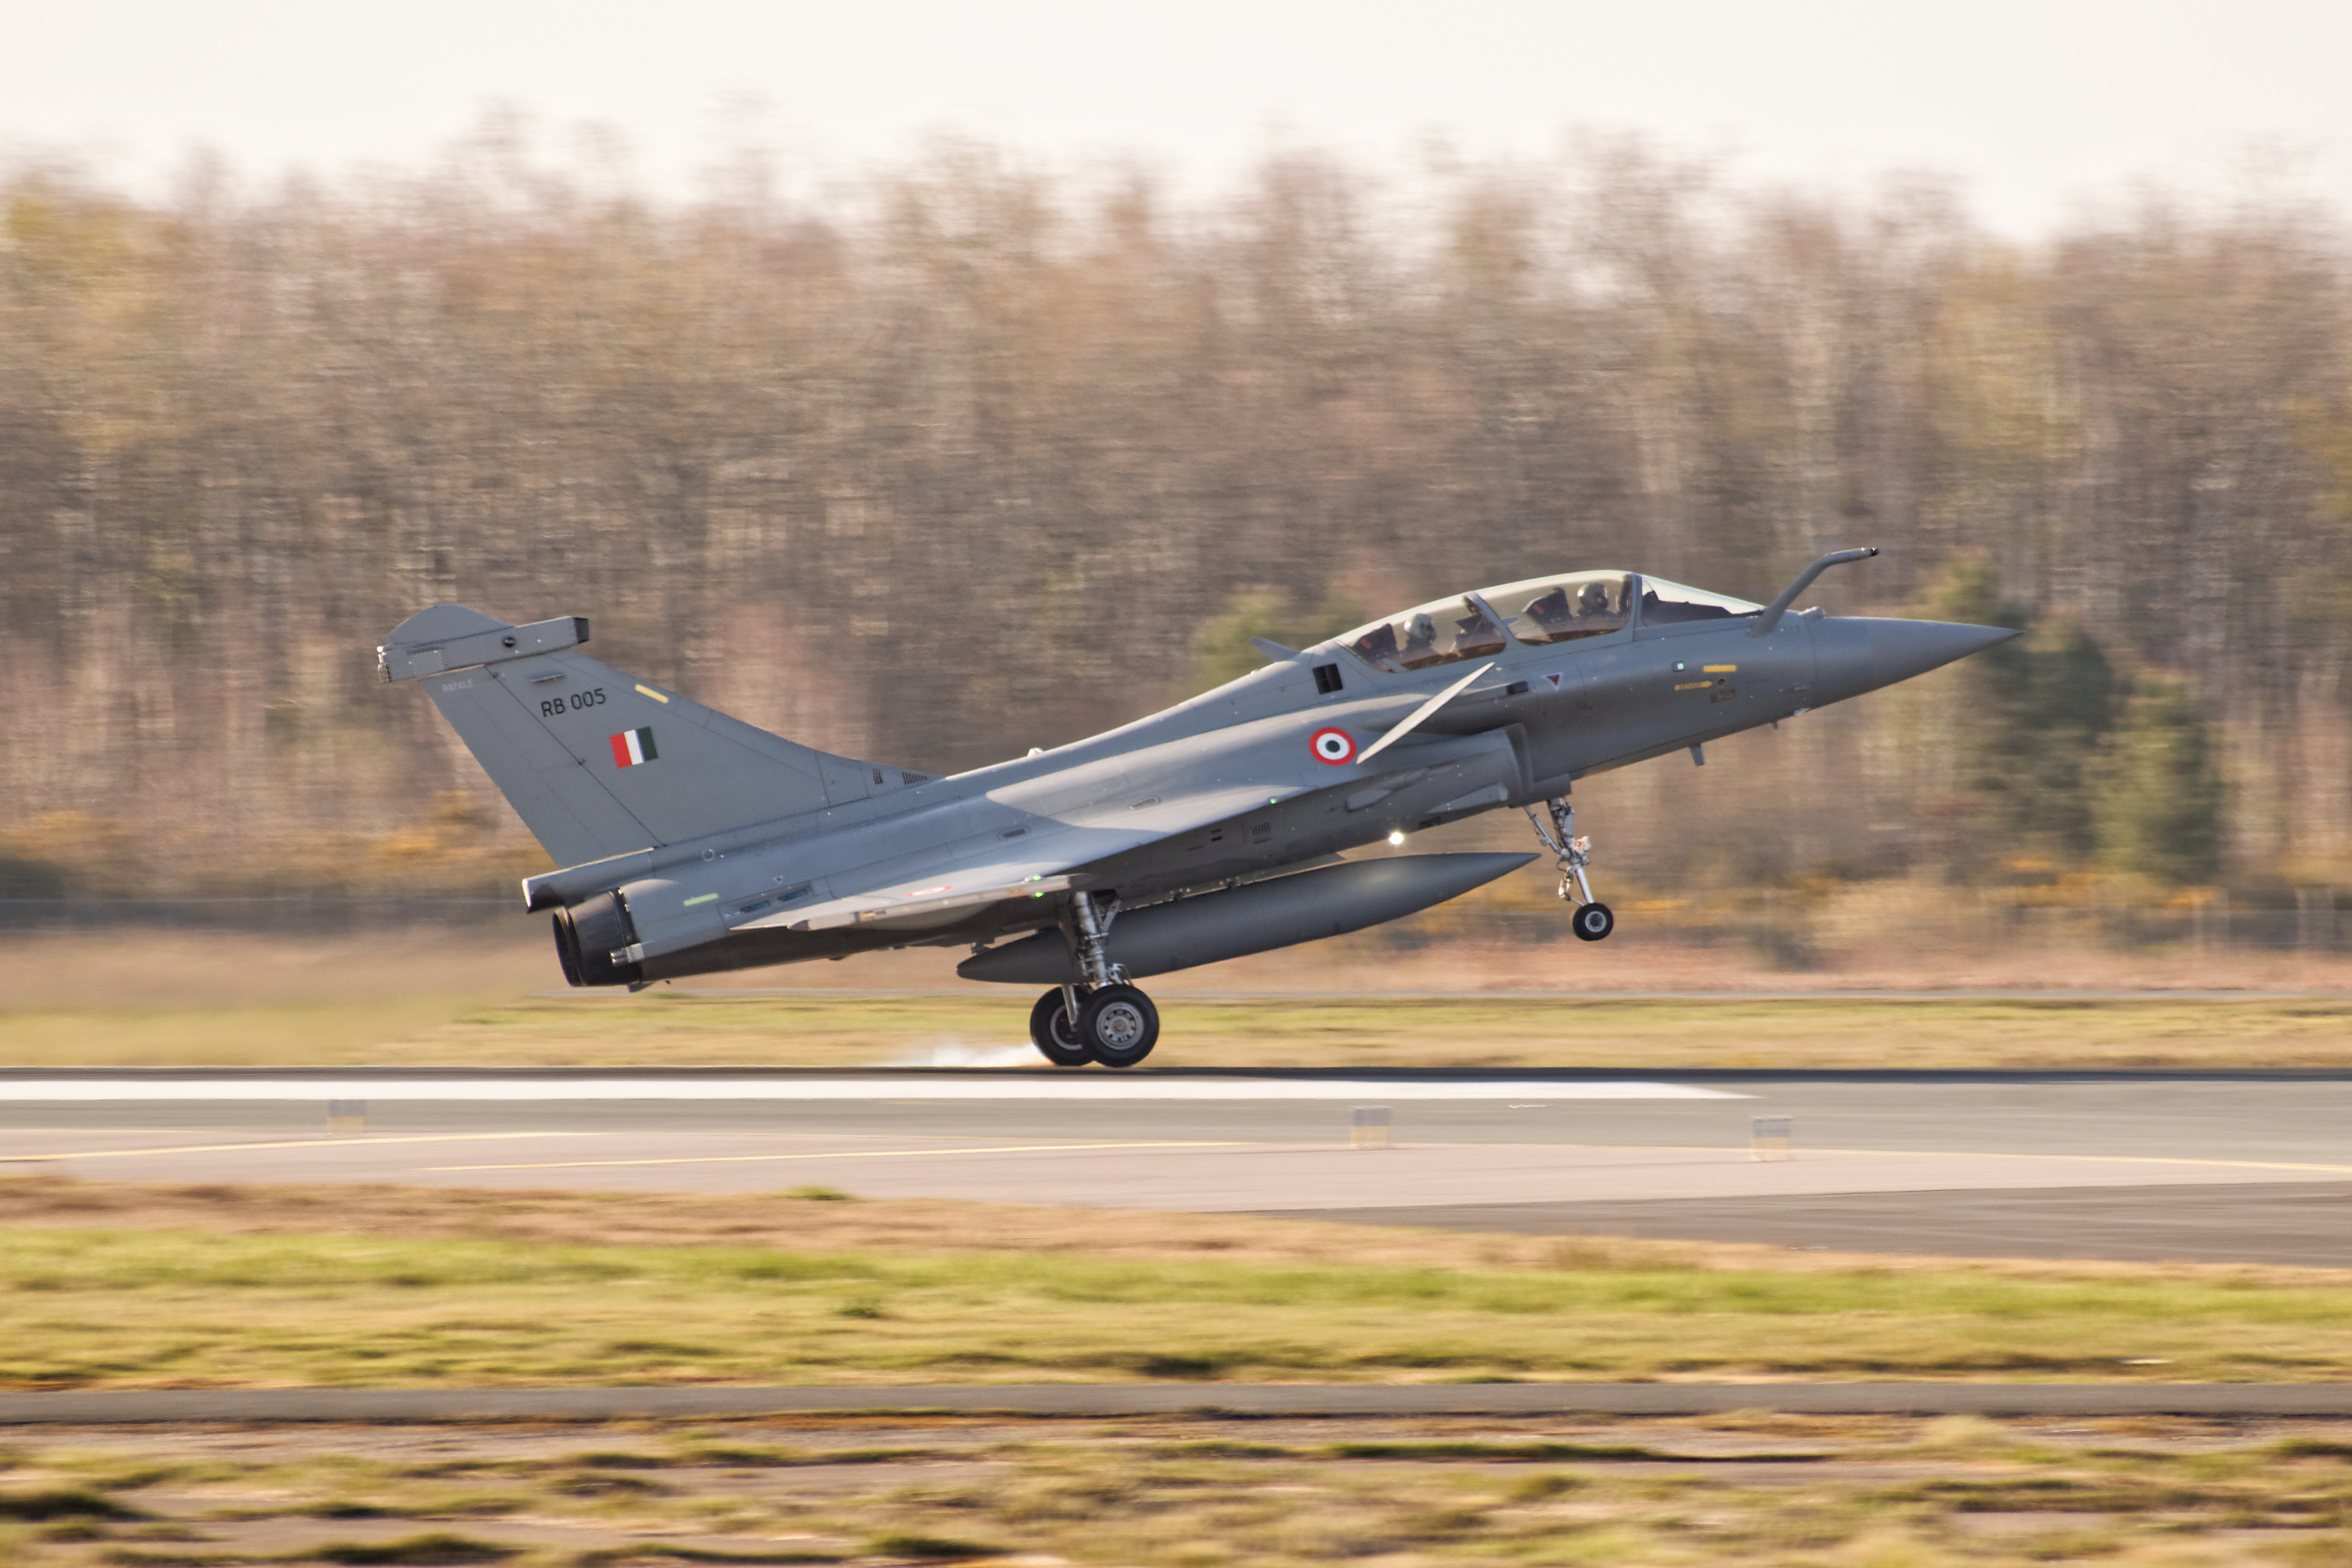 File:RB 005 - Dassault Rafale - Indian Air Force.jpg - Wikimedia Commons